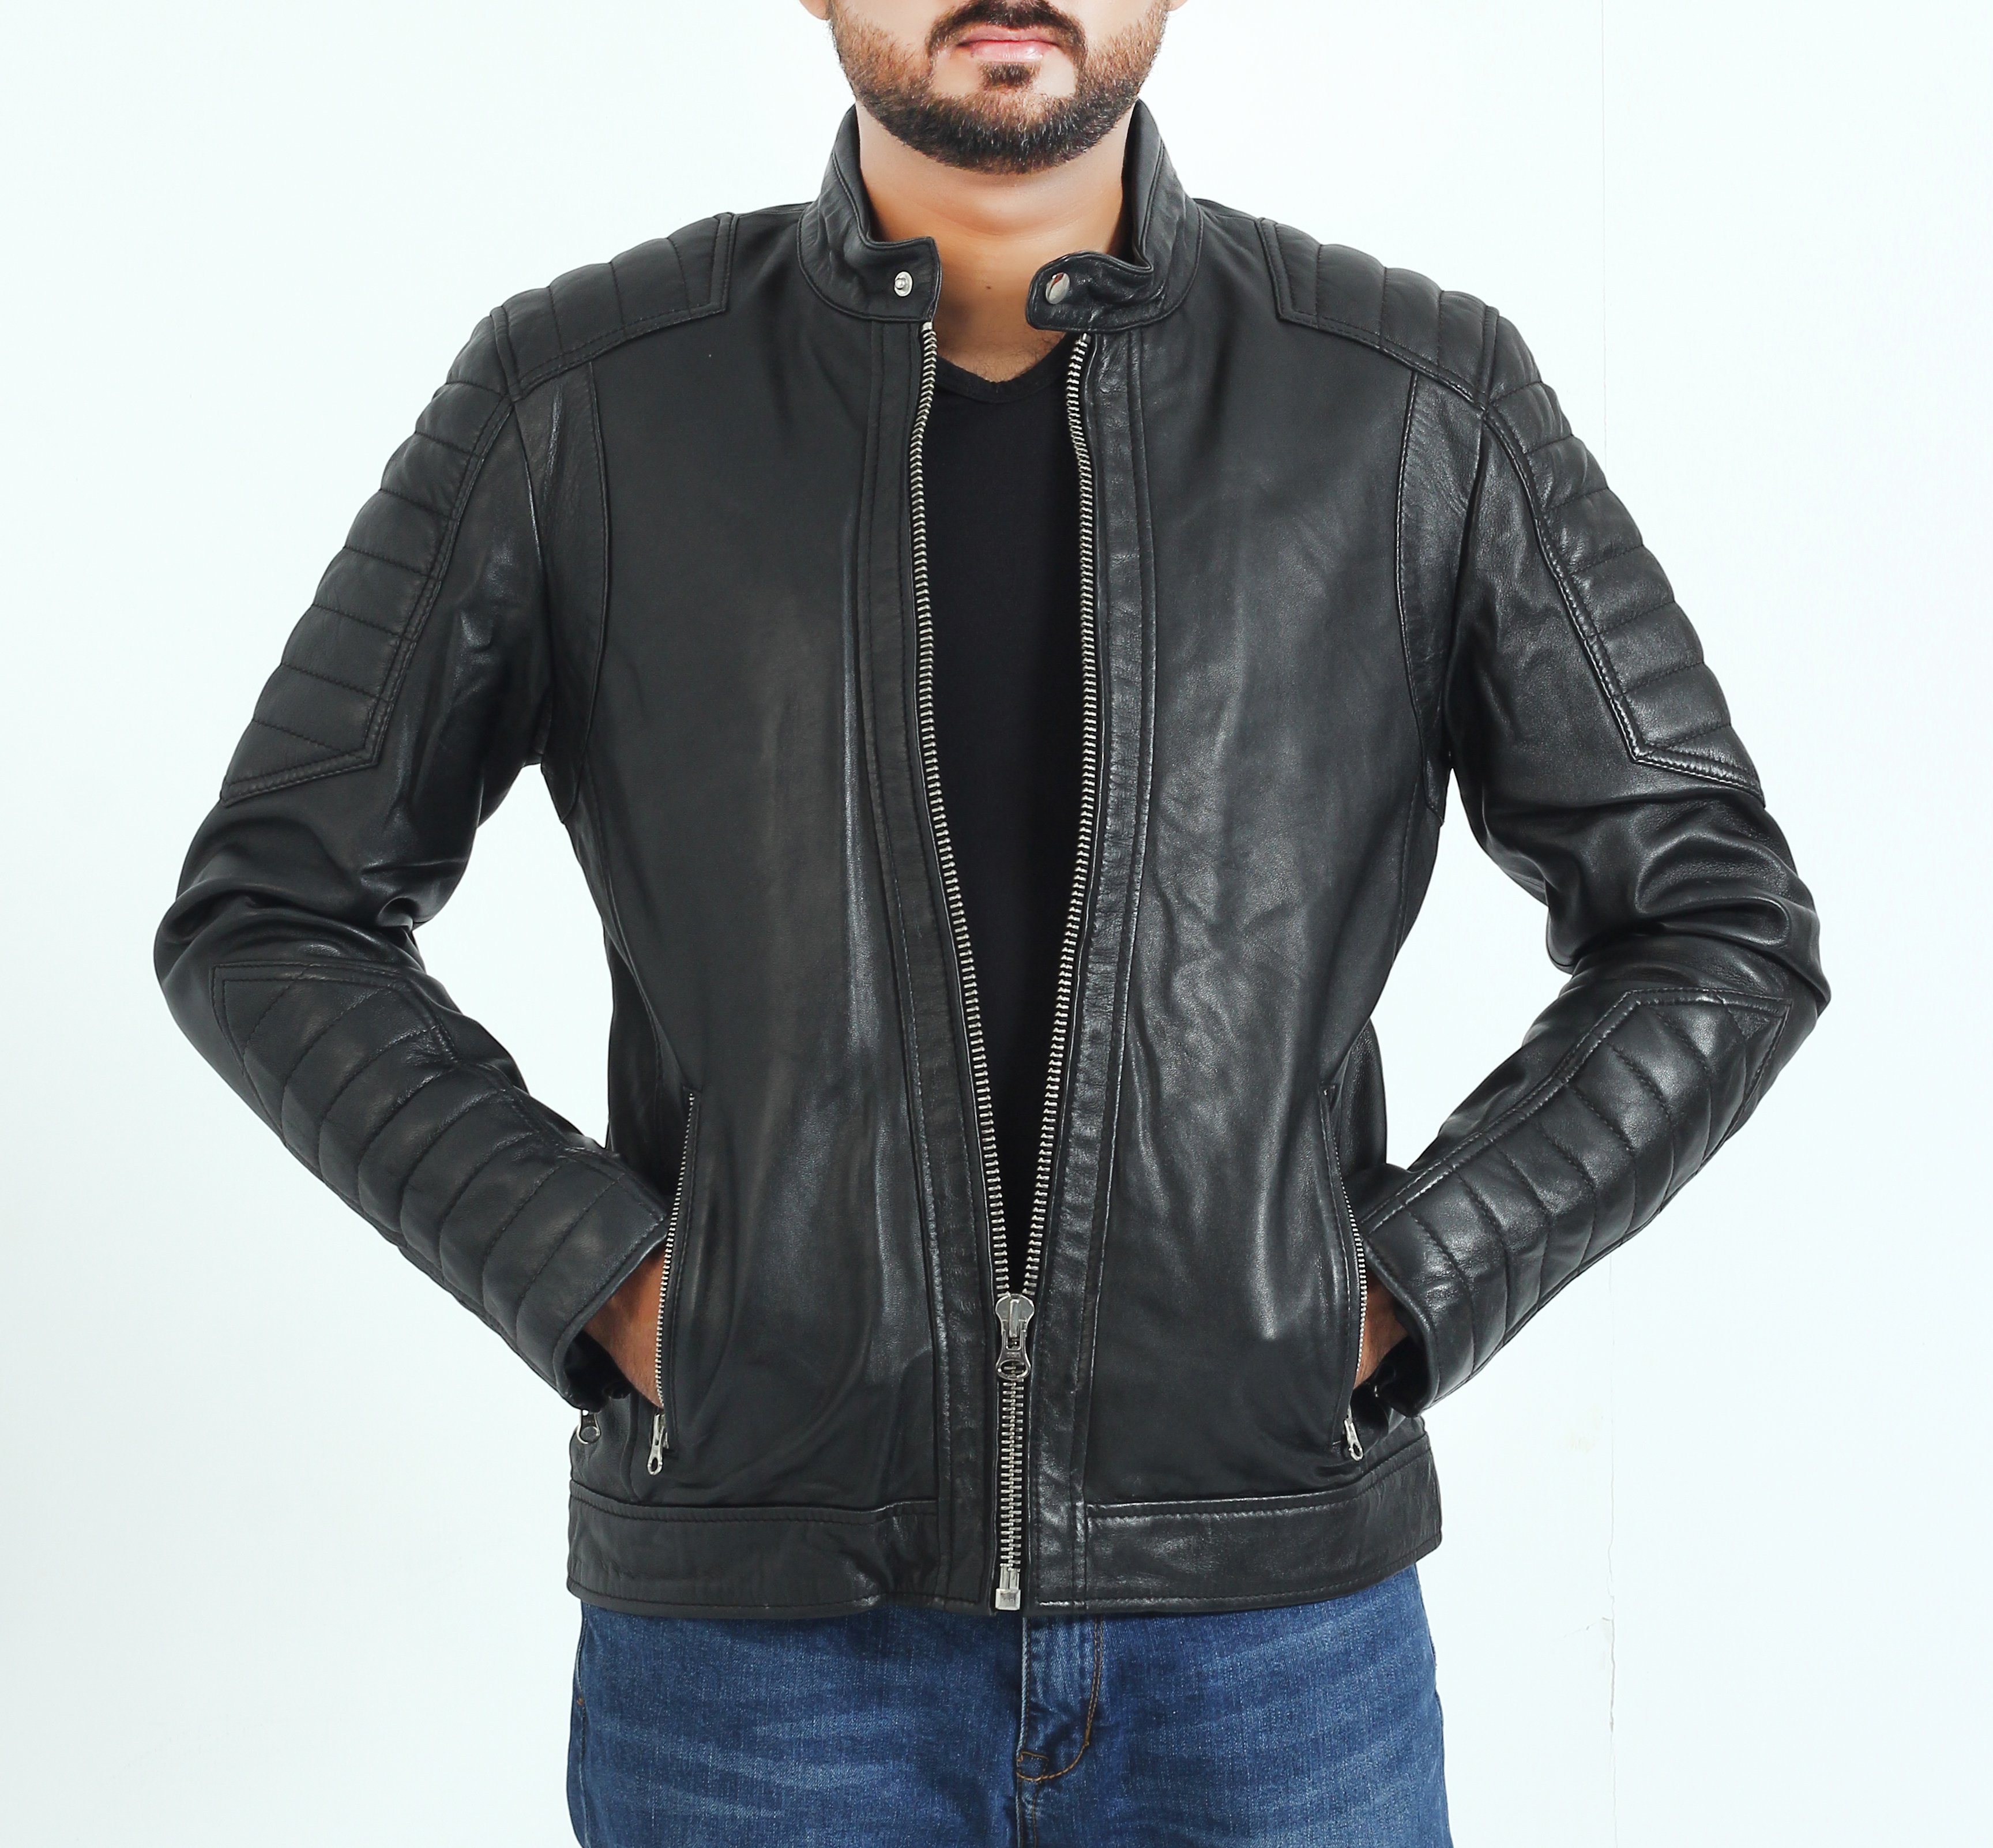 Leather Jacket Quilted Design on arm and shoulder